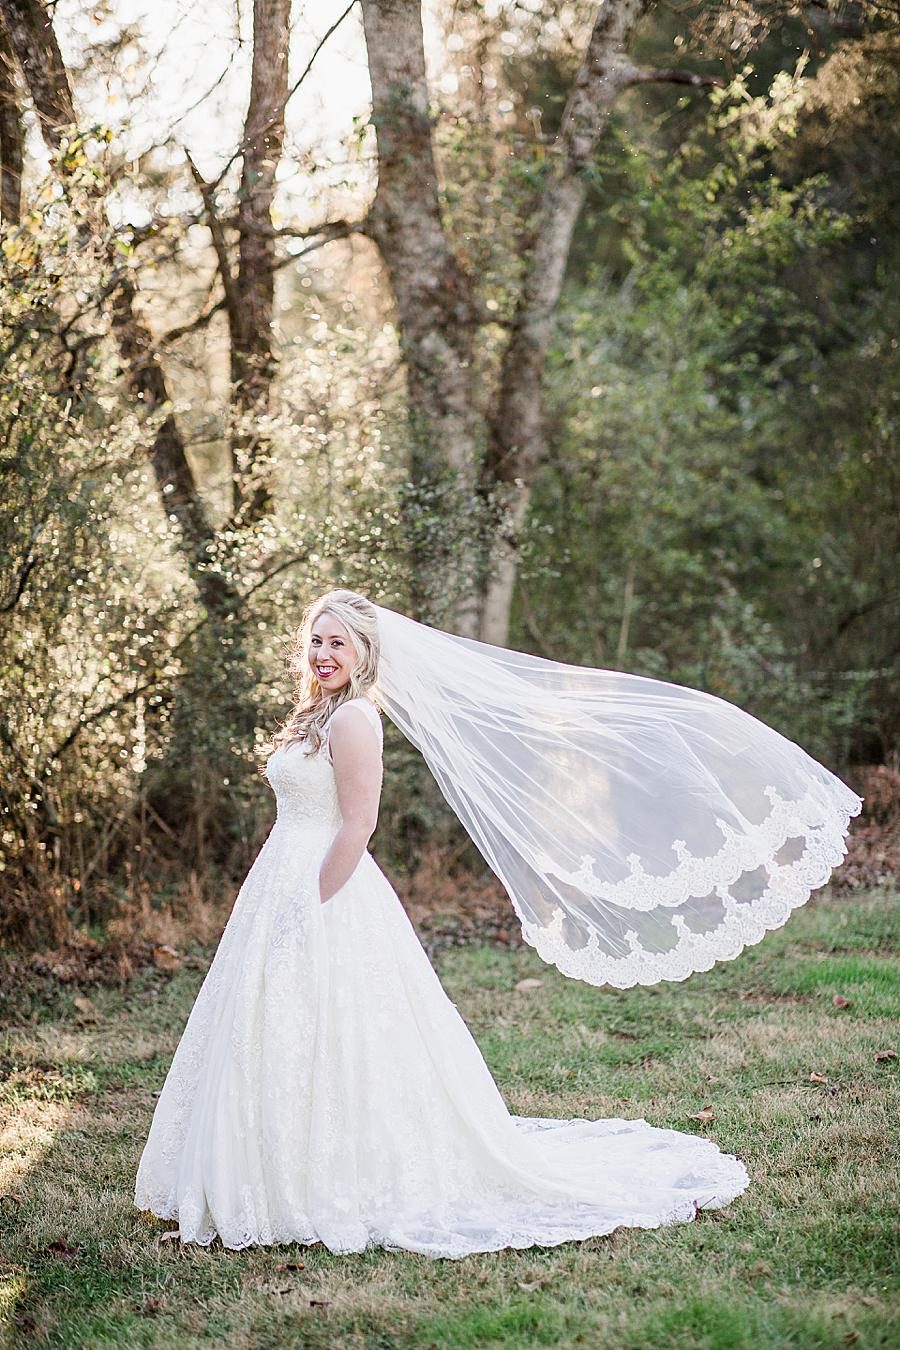 Veil in the wind by Knoxville Wedding Photographer, Amanda May Photos.